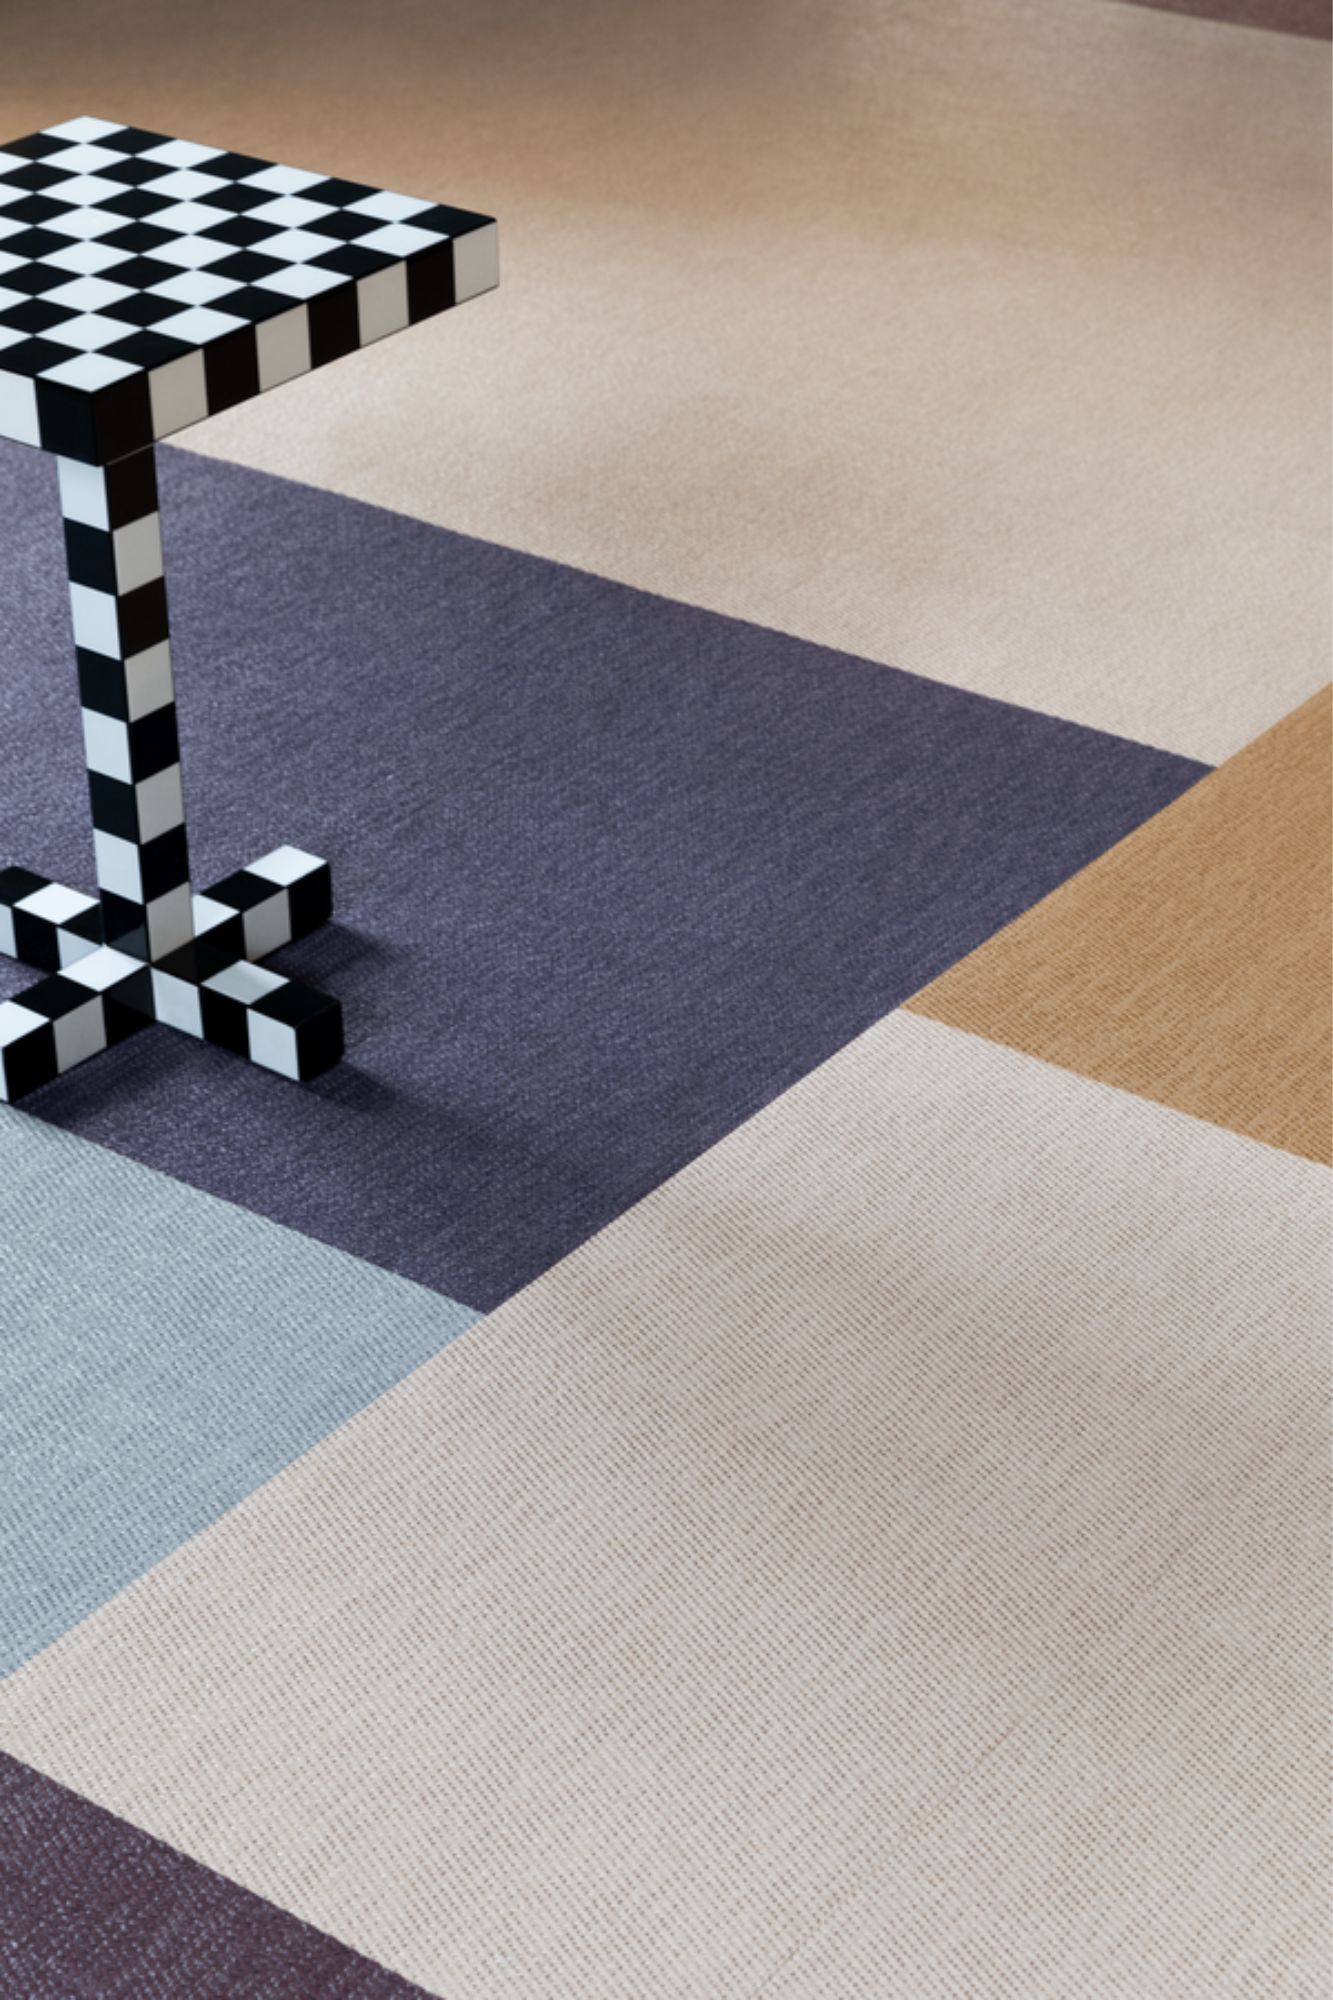 rug designs, Bolon Launches Additional Colourways for Its Artisan and Botanic Collections